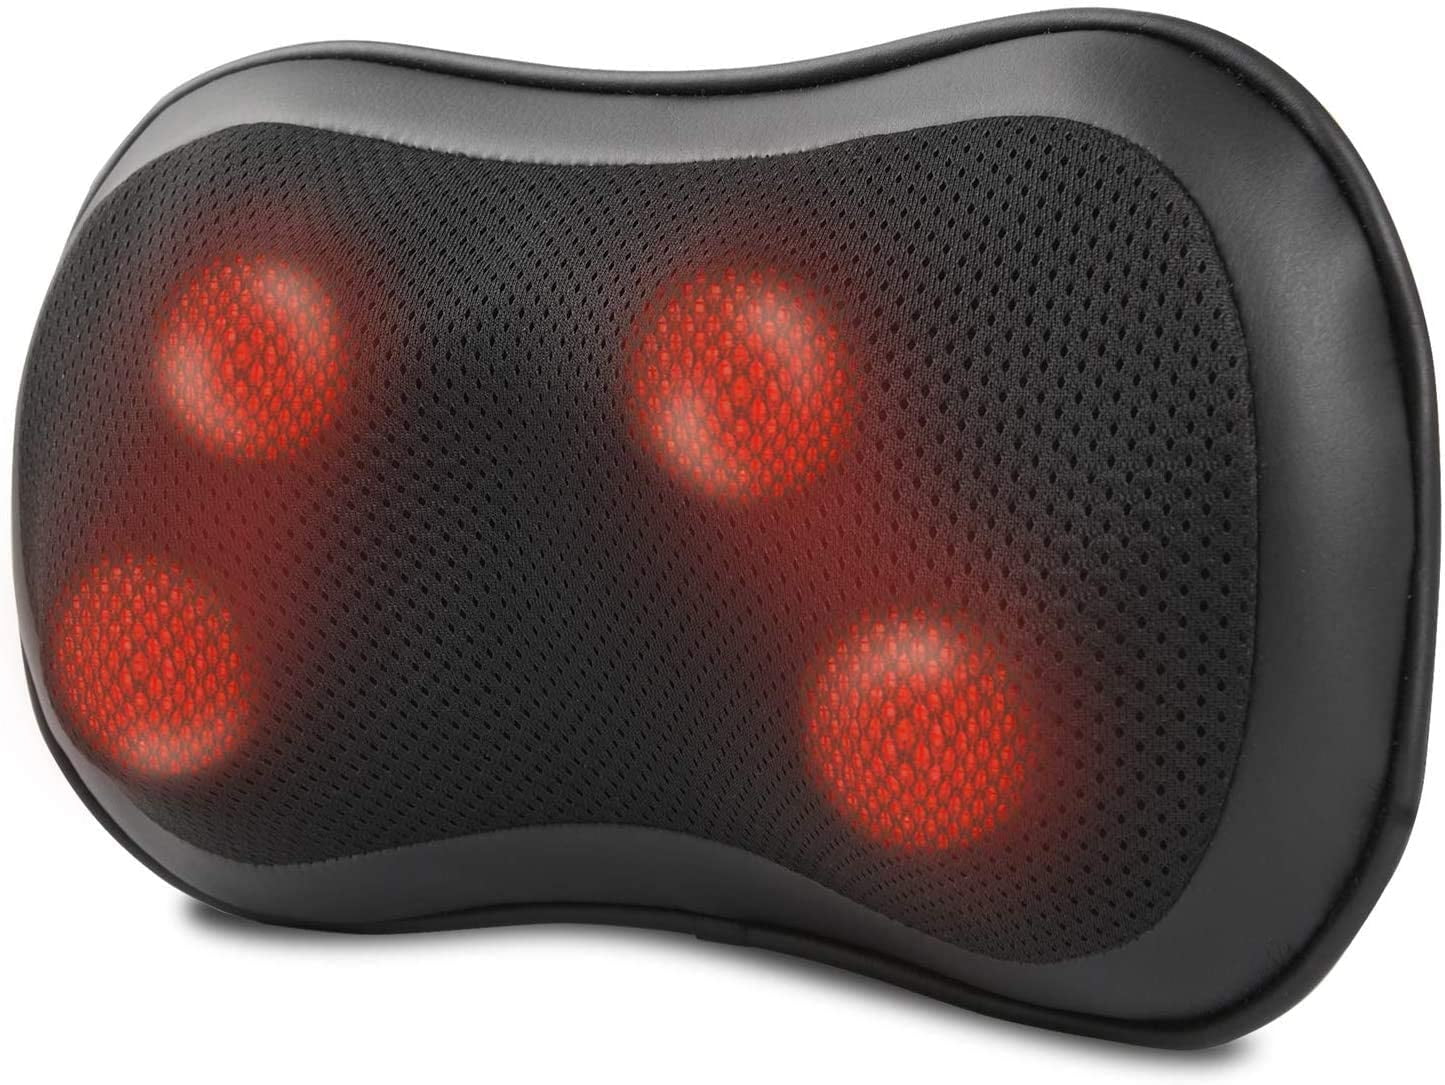 AccuMed Shiatsu Neck and Back Massager with Heat